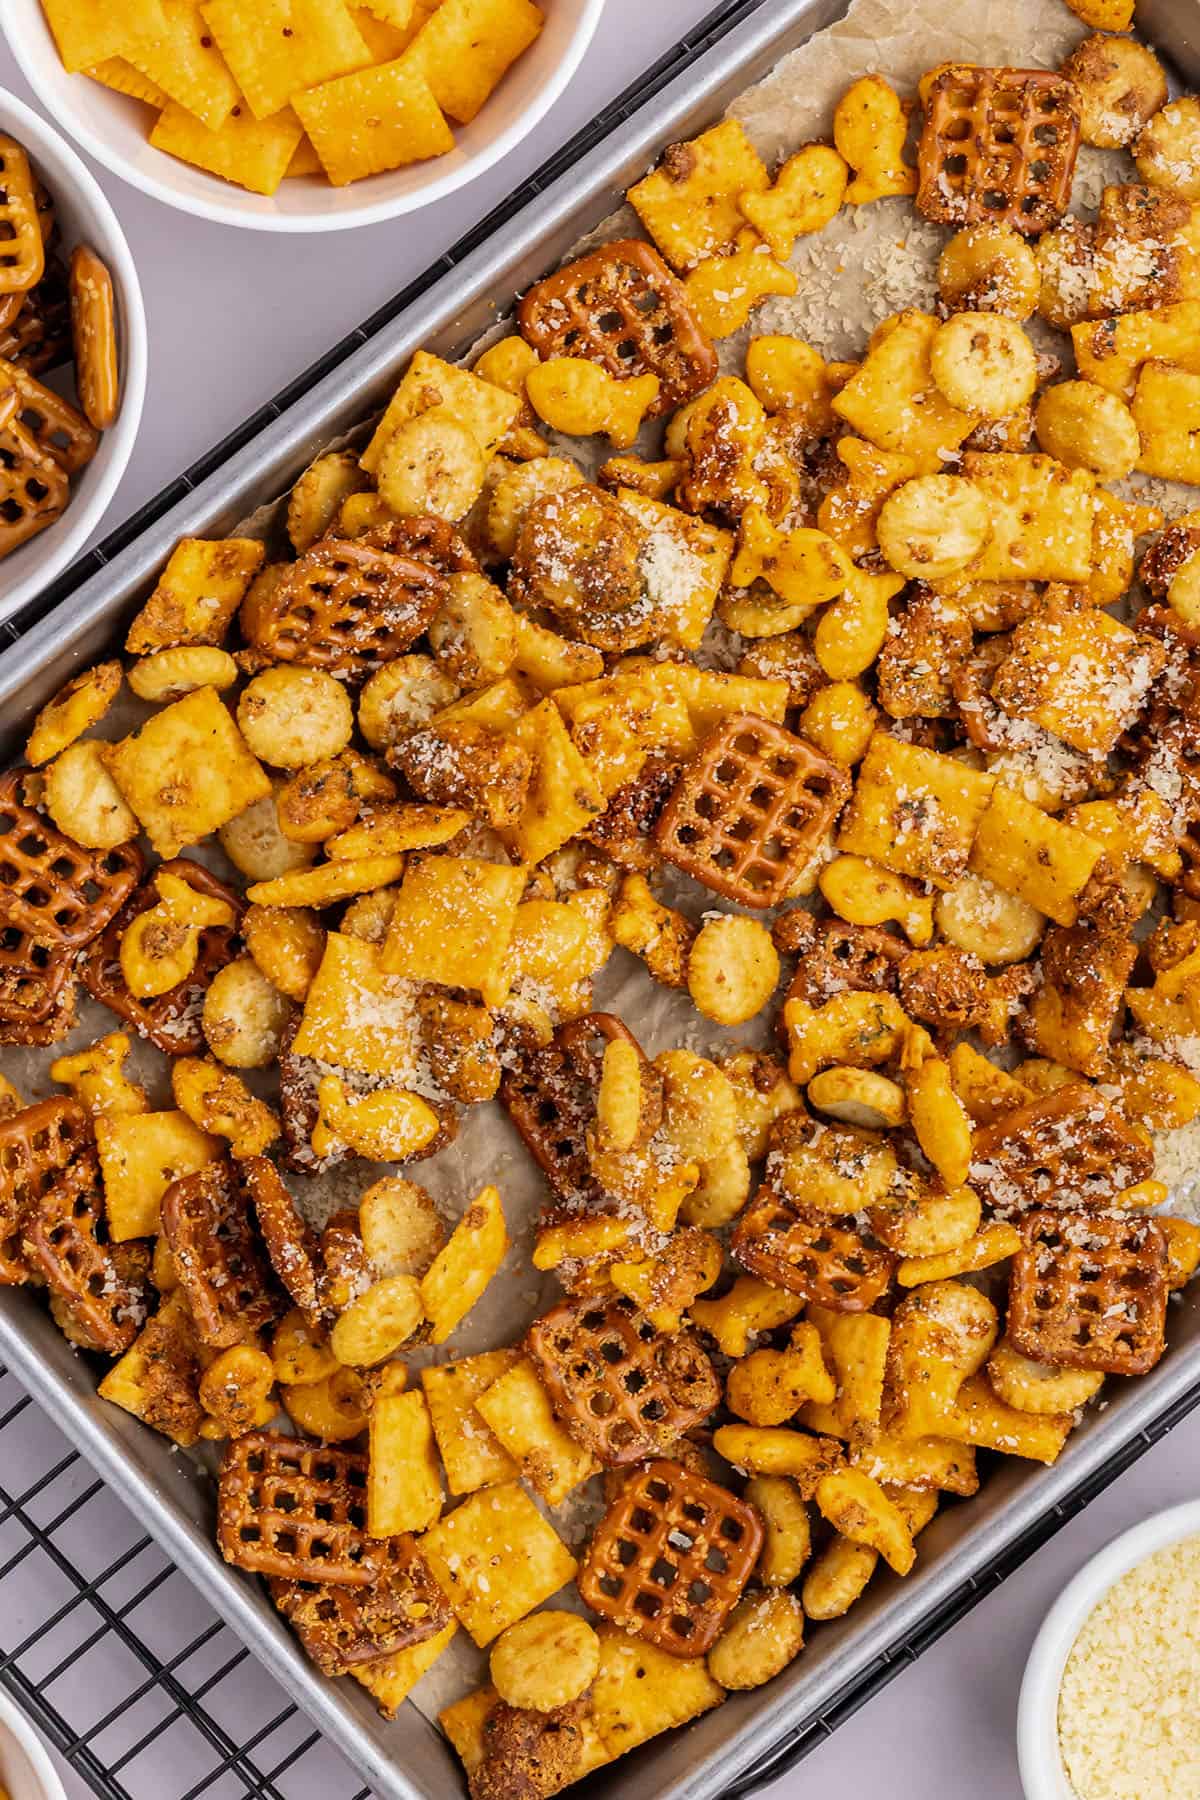 ranch and parmesan snack mix on a baking sheet